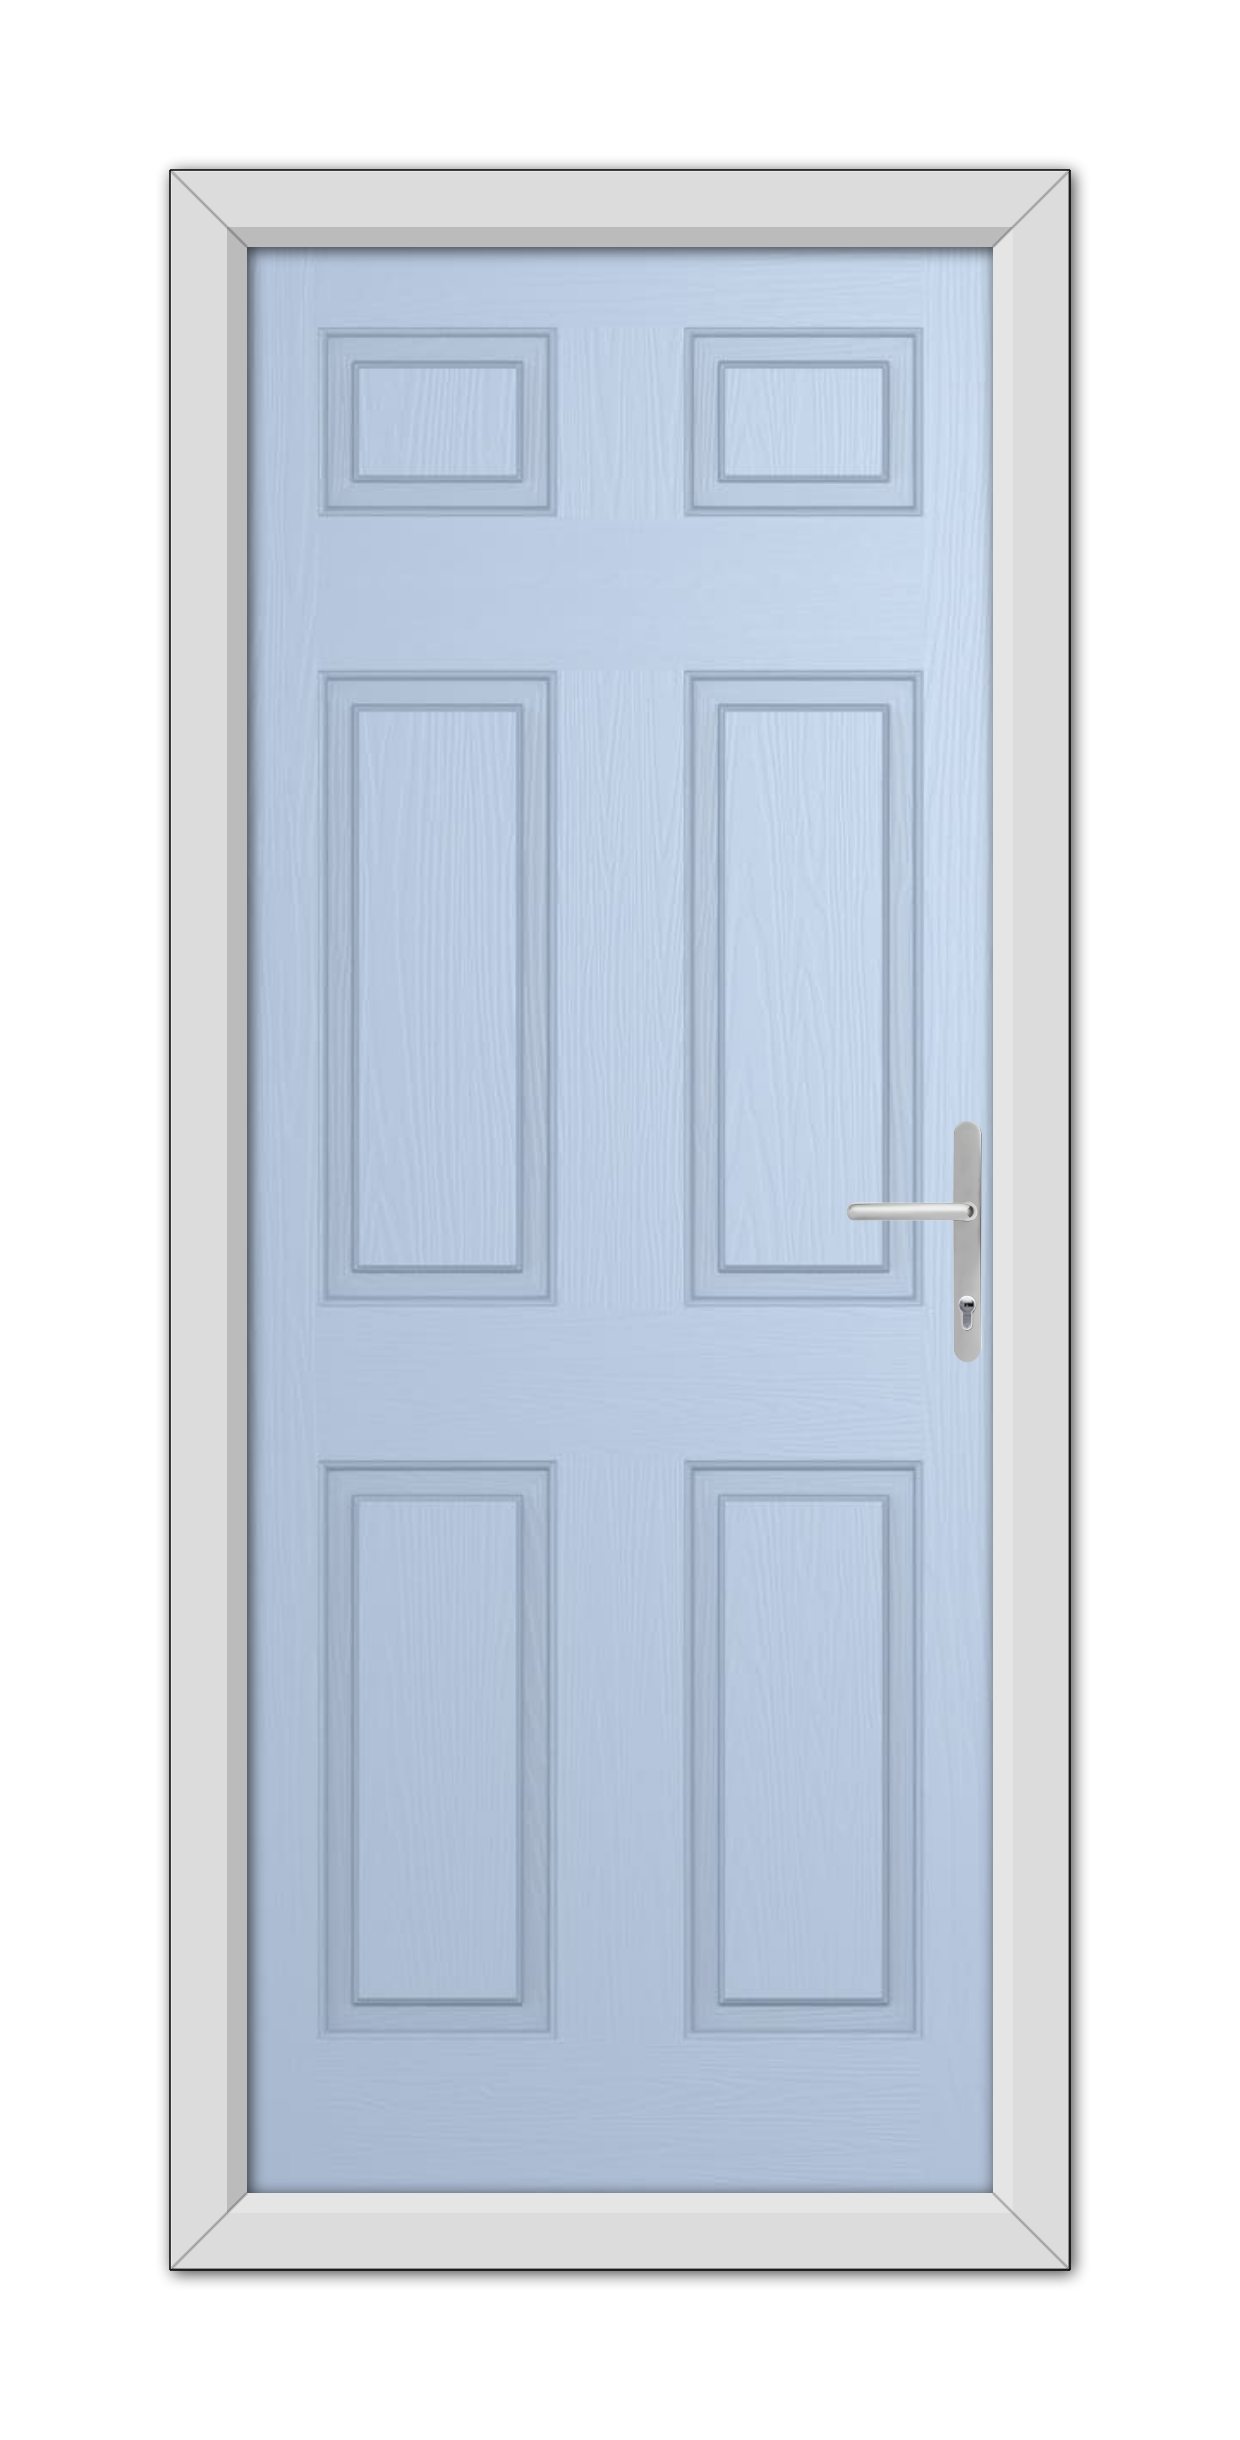 A closed Duck Egg Blue Middleton Solid Composite Door with six panels and a silver handle, set within a white frame.